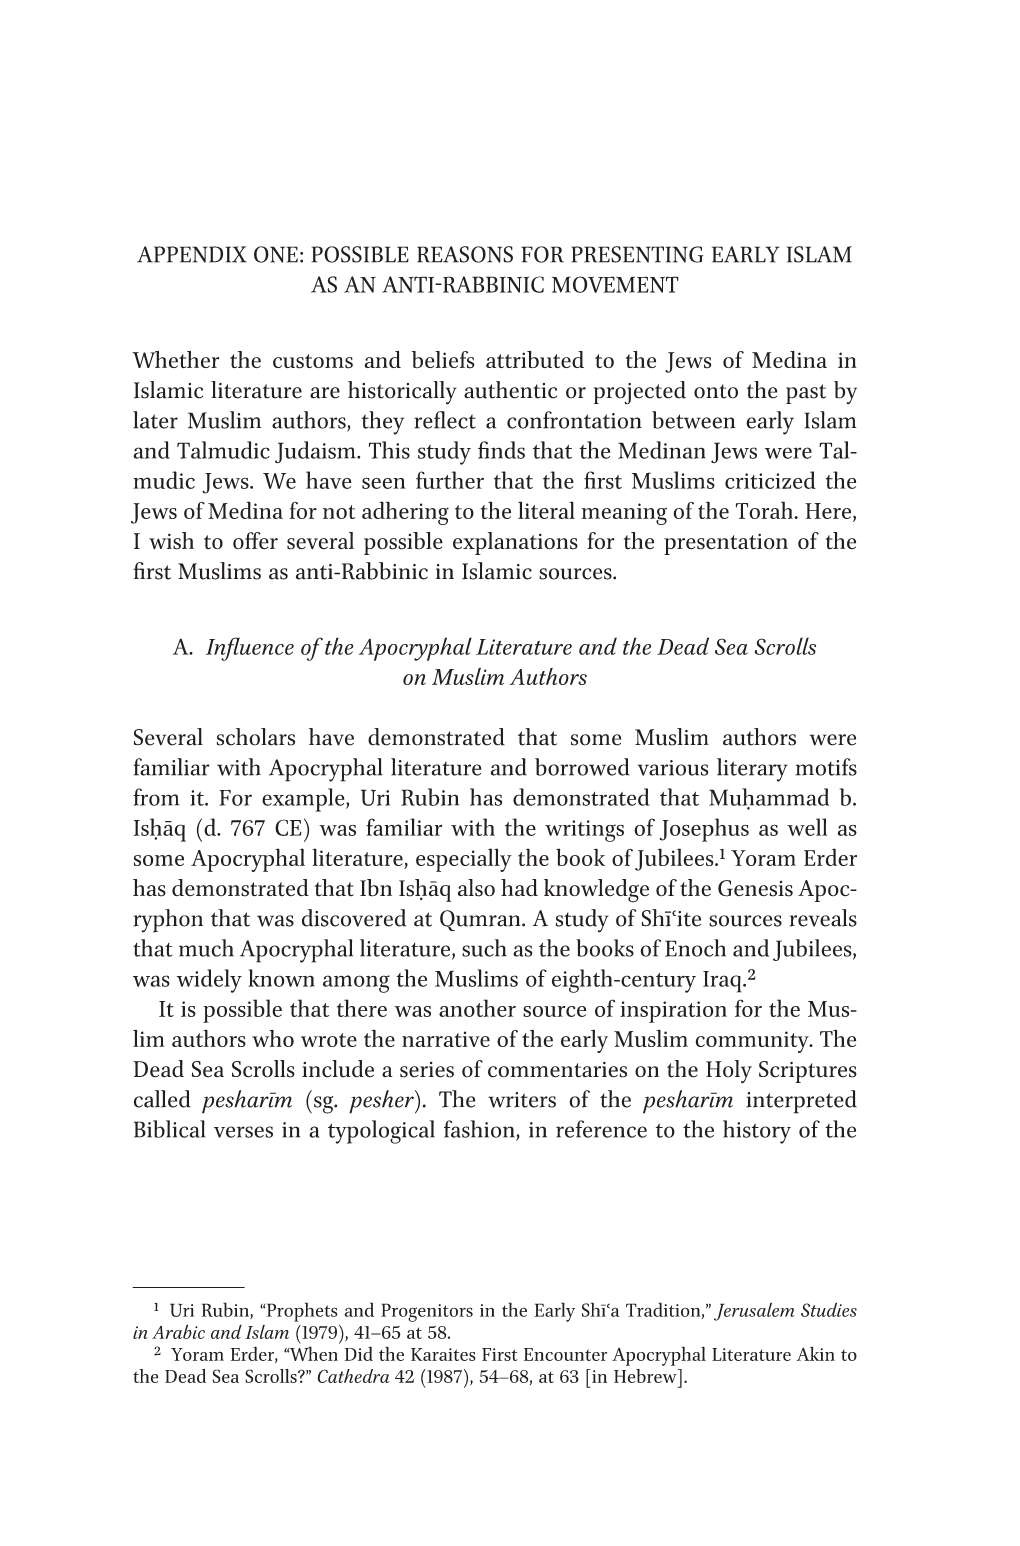 Possible Reasons for Presenting Early Islam As an Anti-Rabbinic Movement